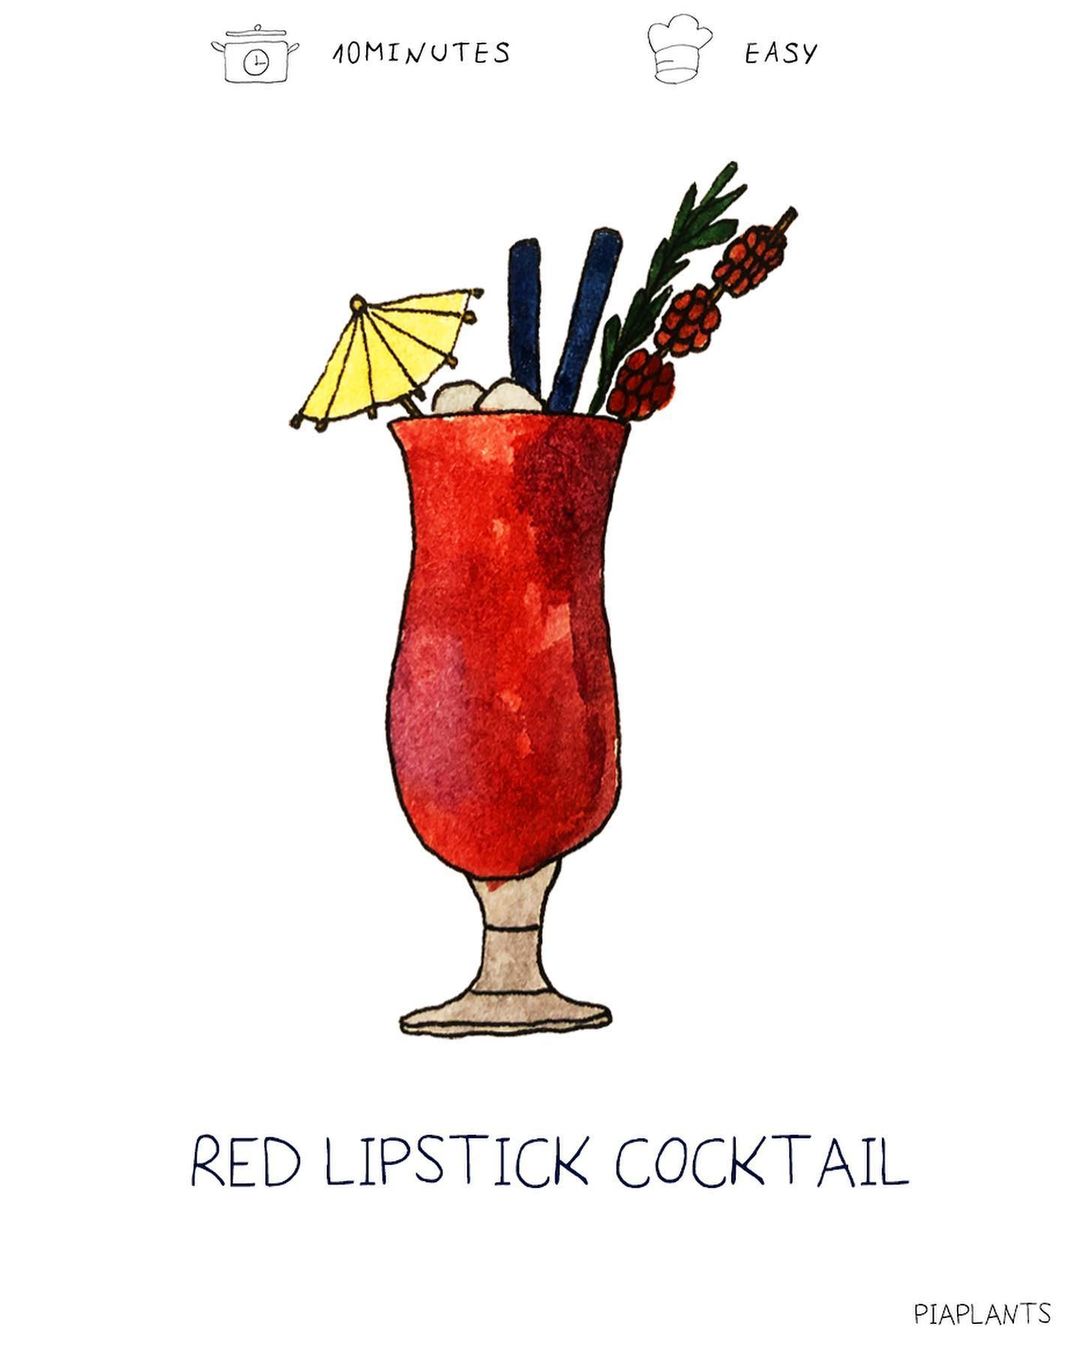 Red Lipstick Cocktail